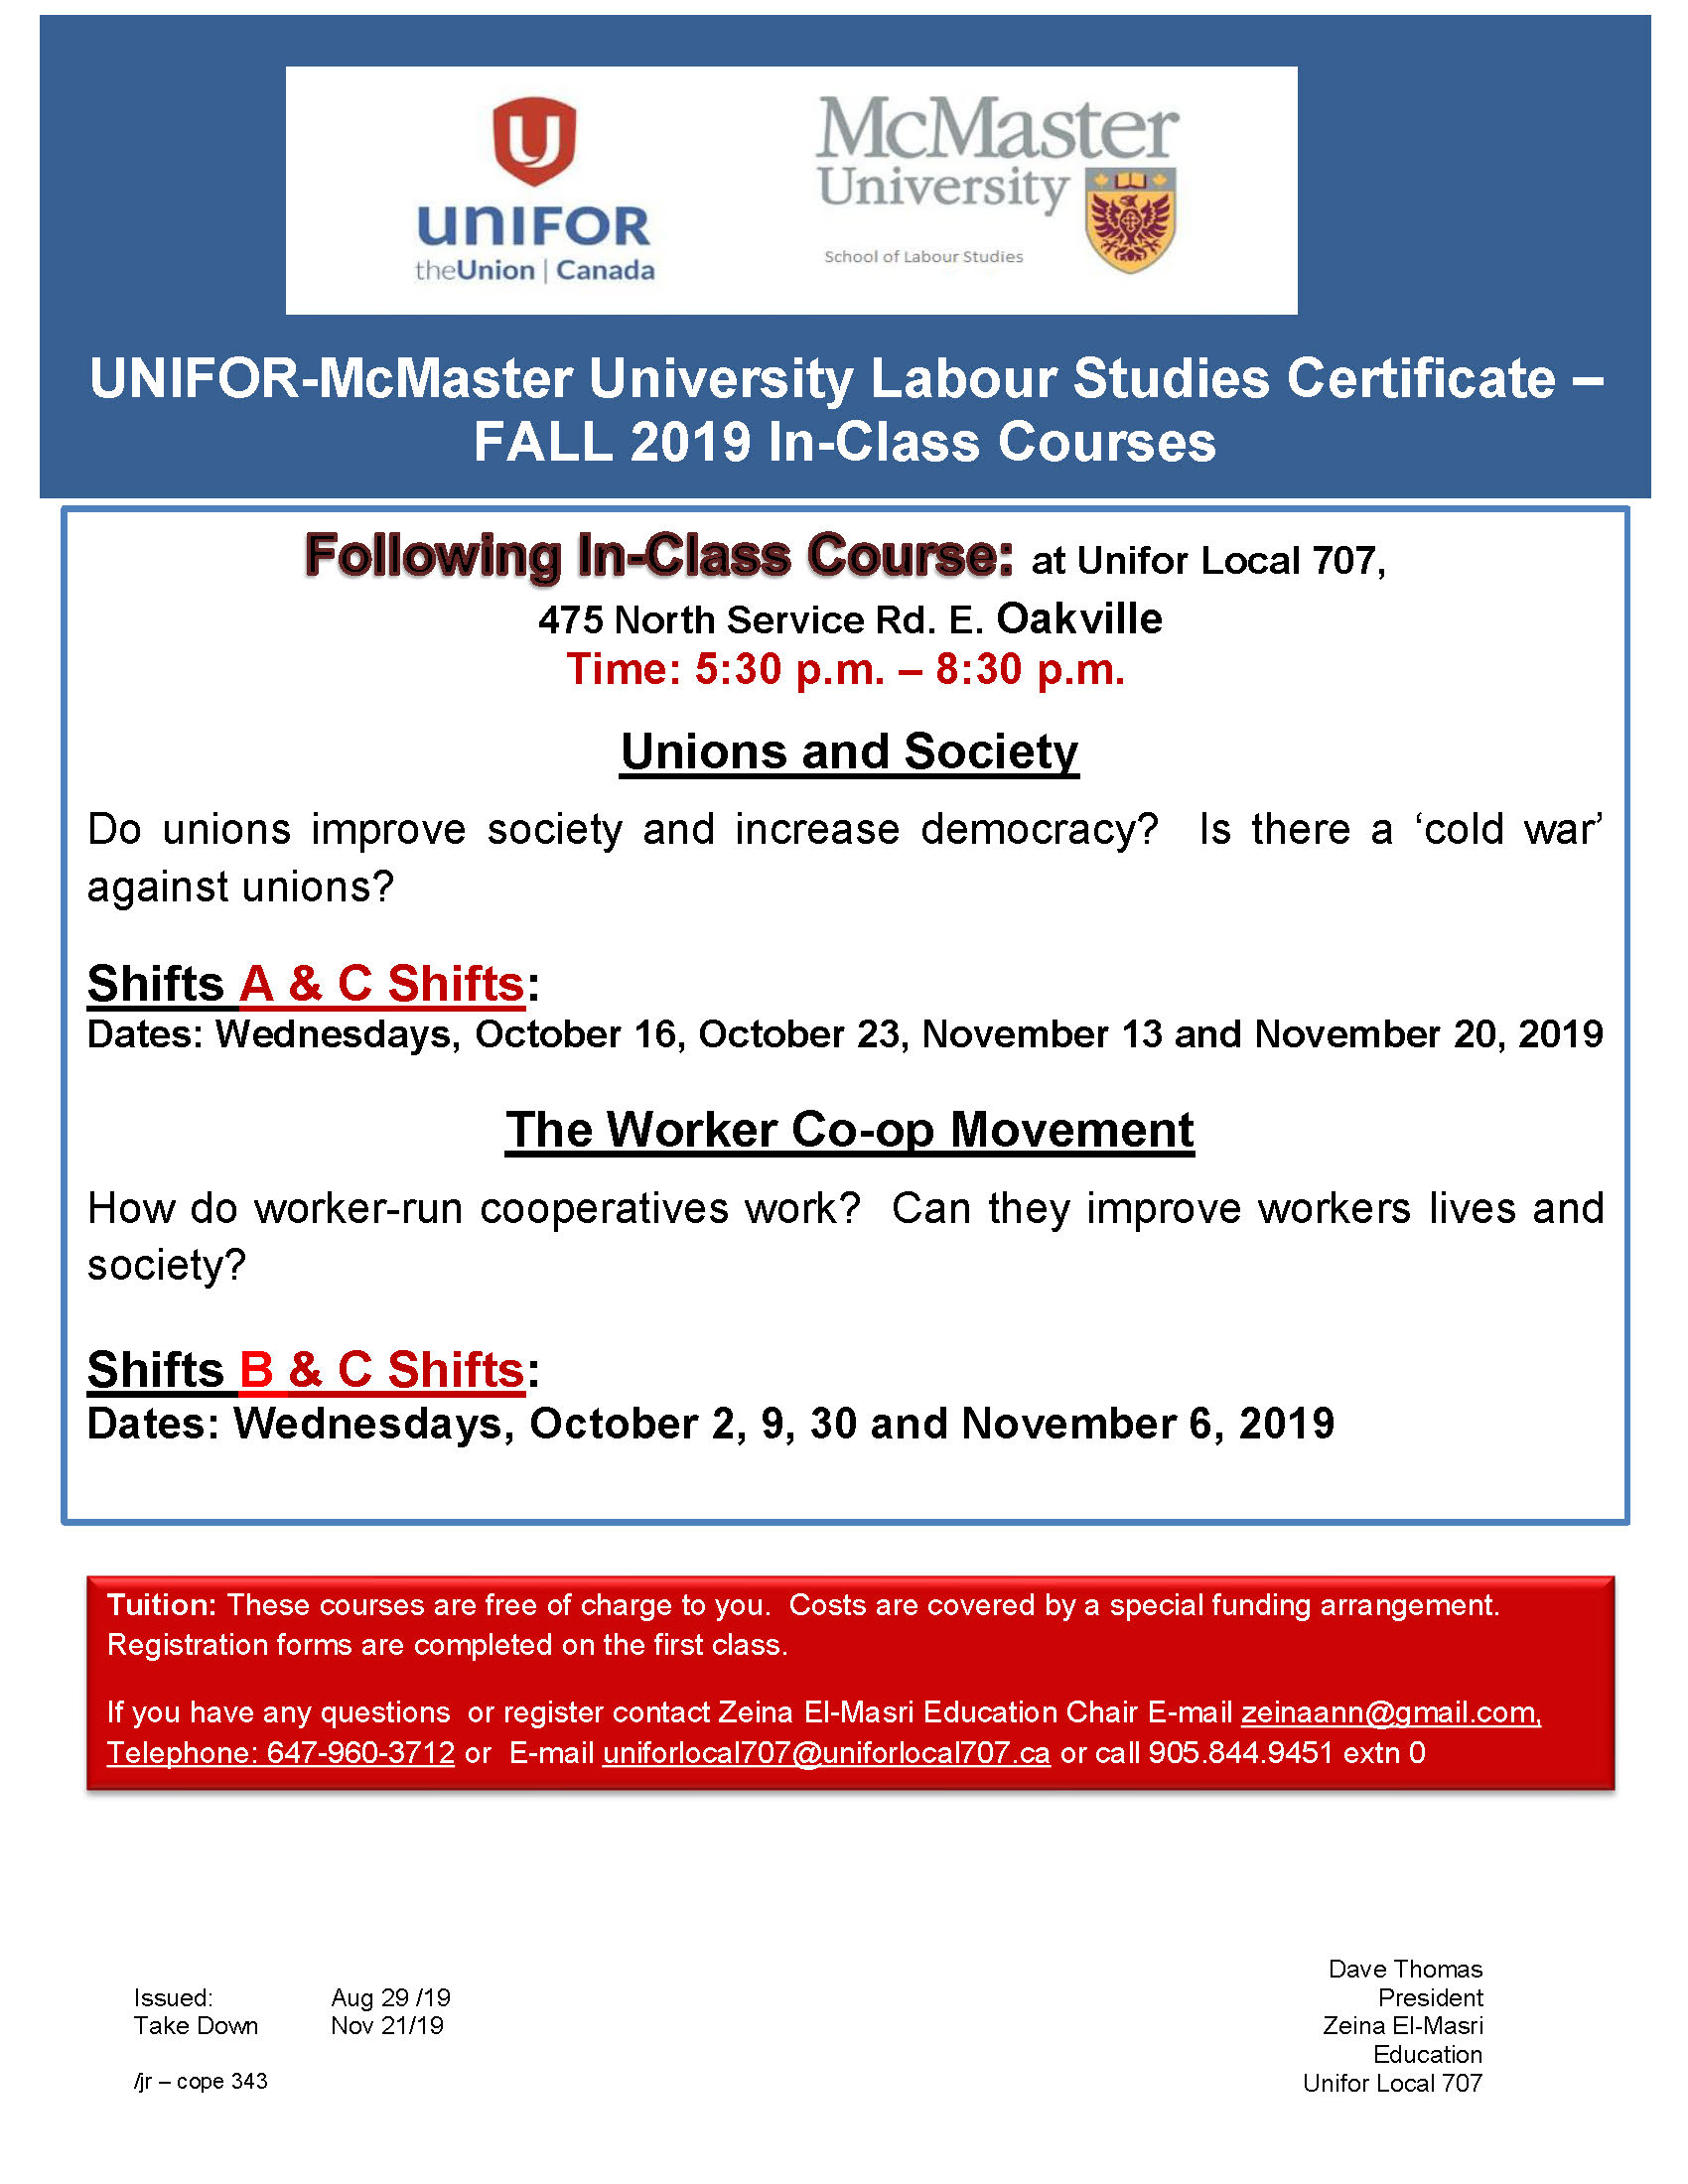 McMaster Studies Certificate Fall 2019 Course at Unifor Local 707 Hall